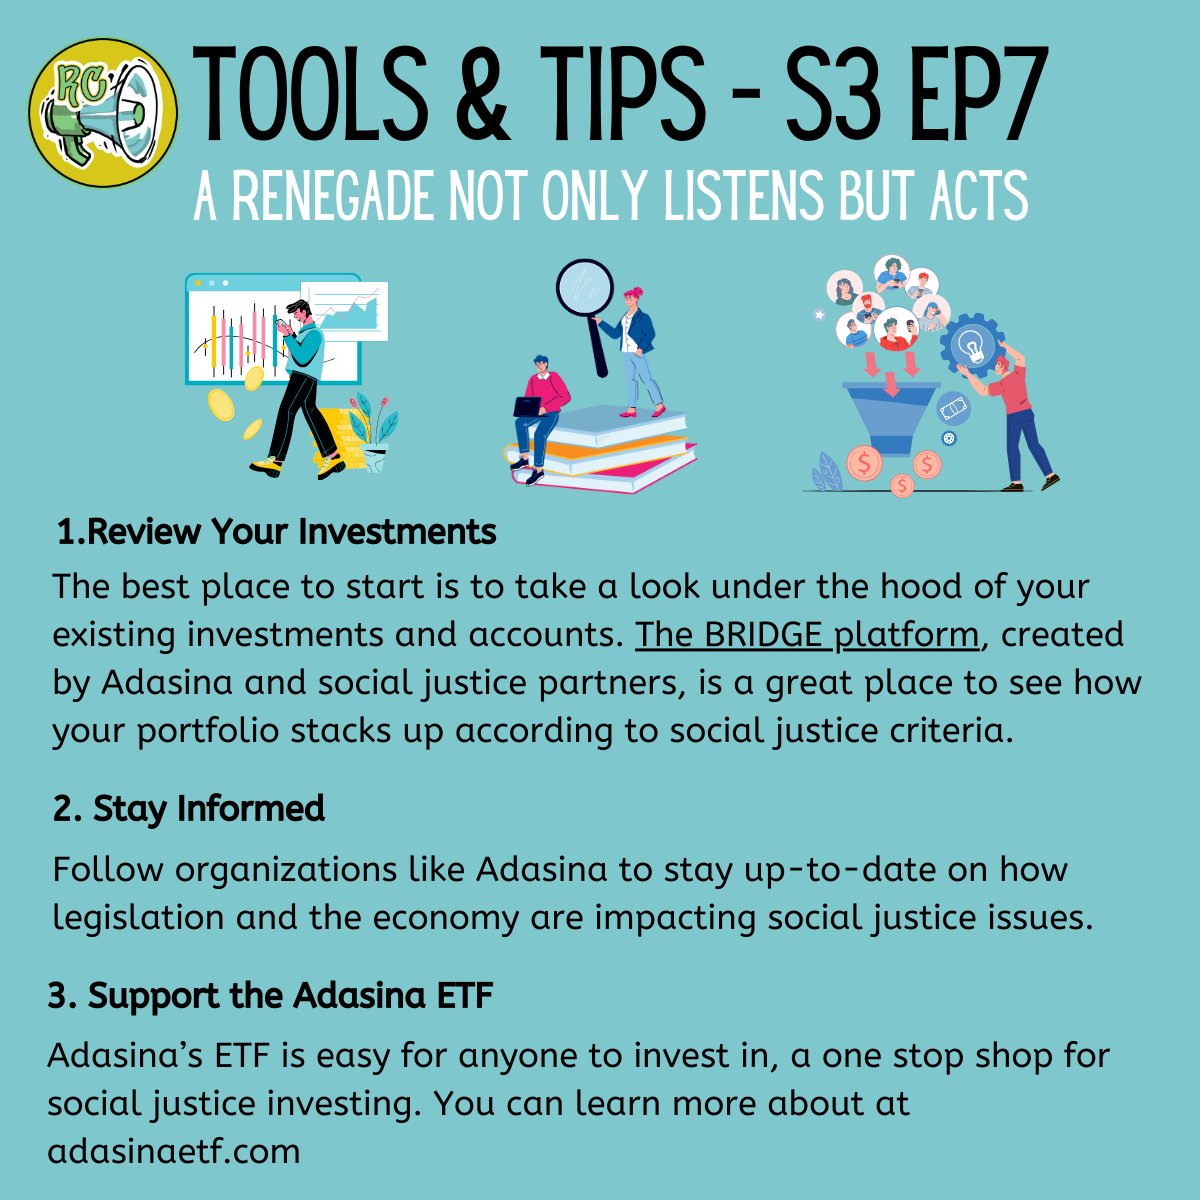 Have you listened to our newest episode and wondered what actions you can take to invest for social justice? We’ve got you covered! Here are some Tools & Tips from Ep 7 to get you started! #renegadecap #impinv